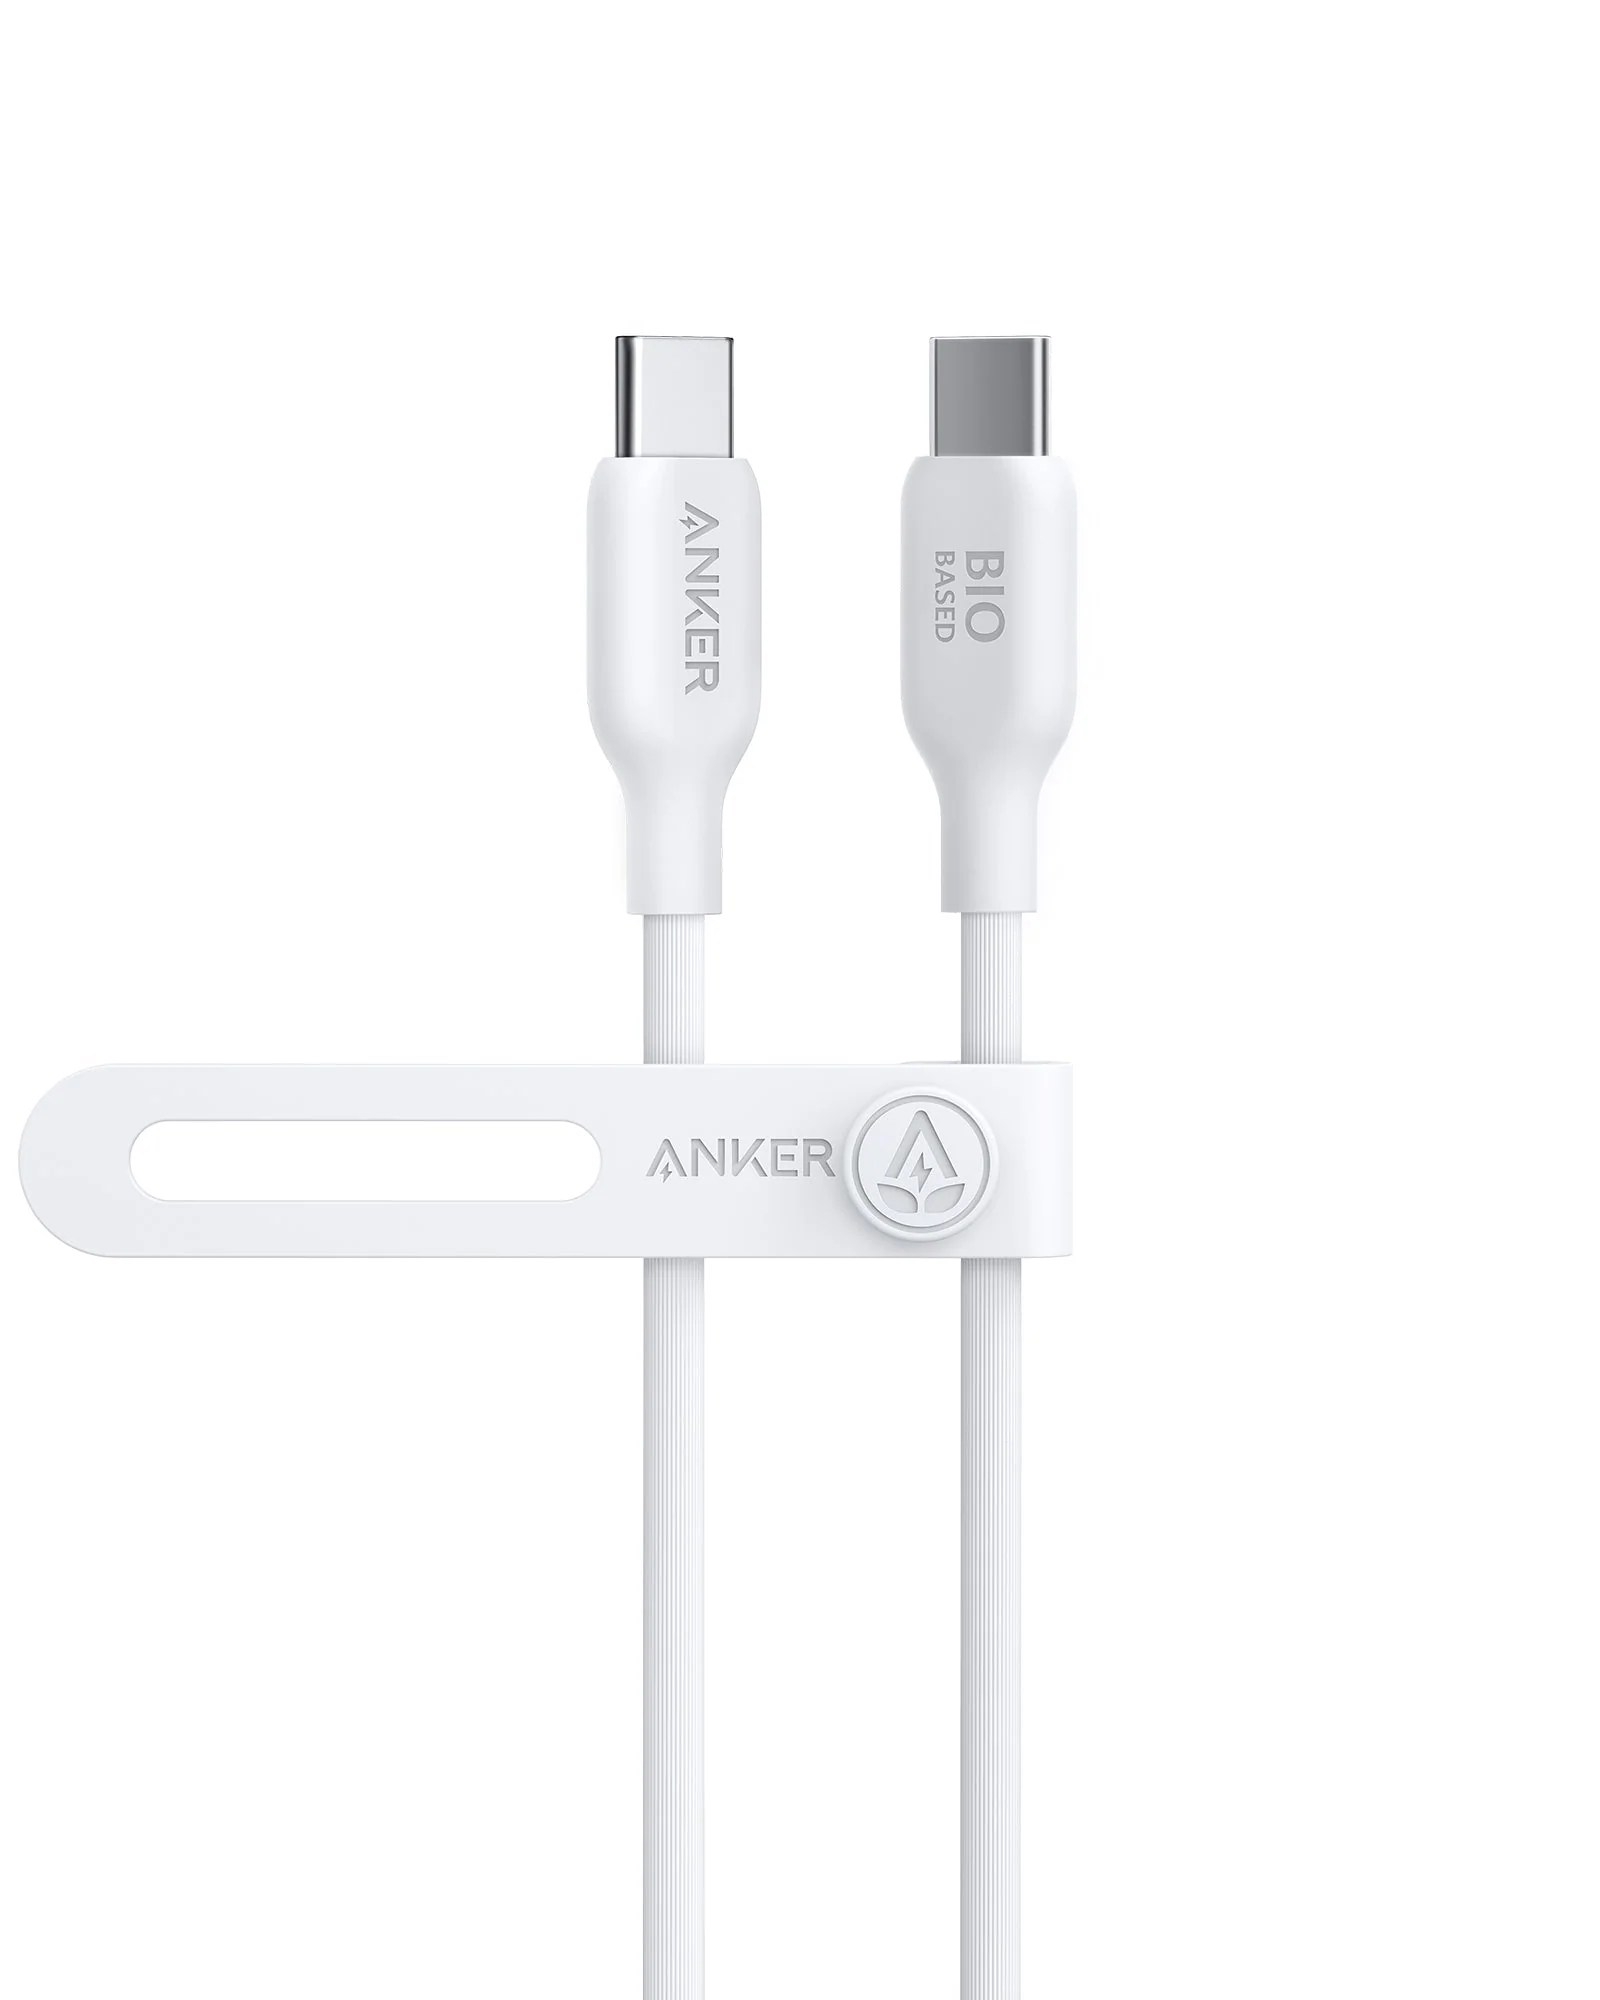 Anker 543 USB-C to USB-C Cable (Bio-Based)